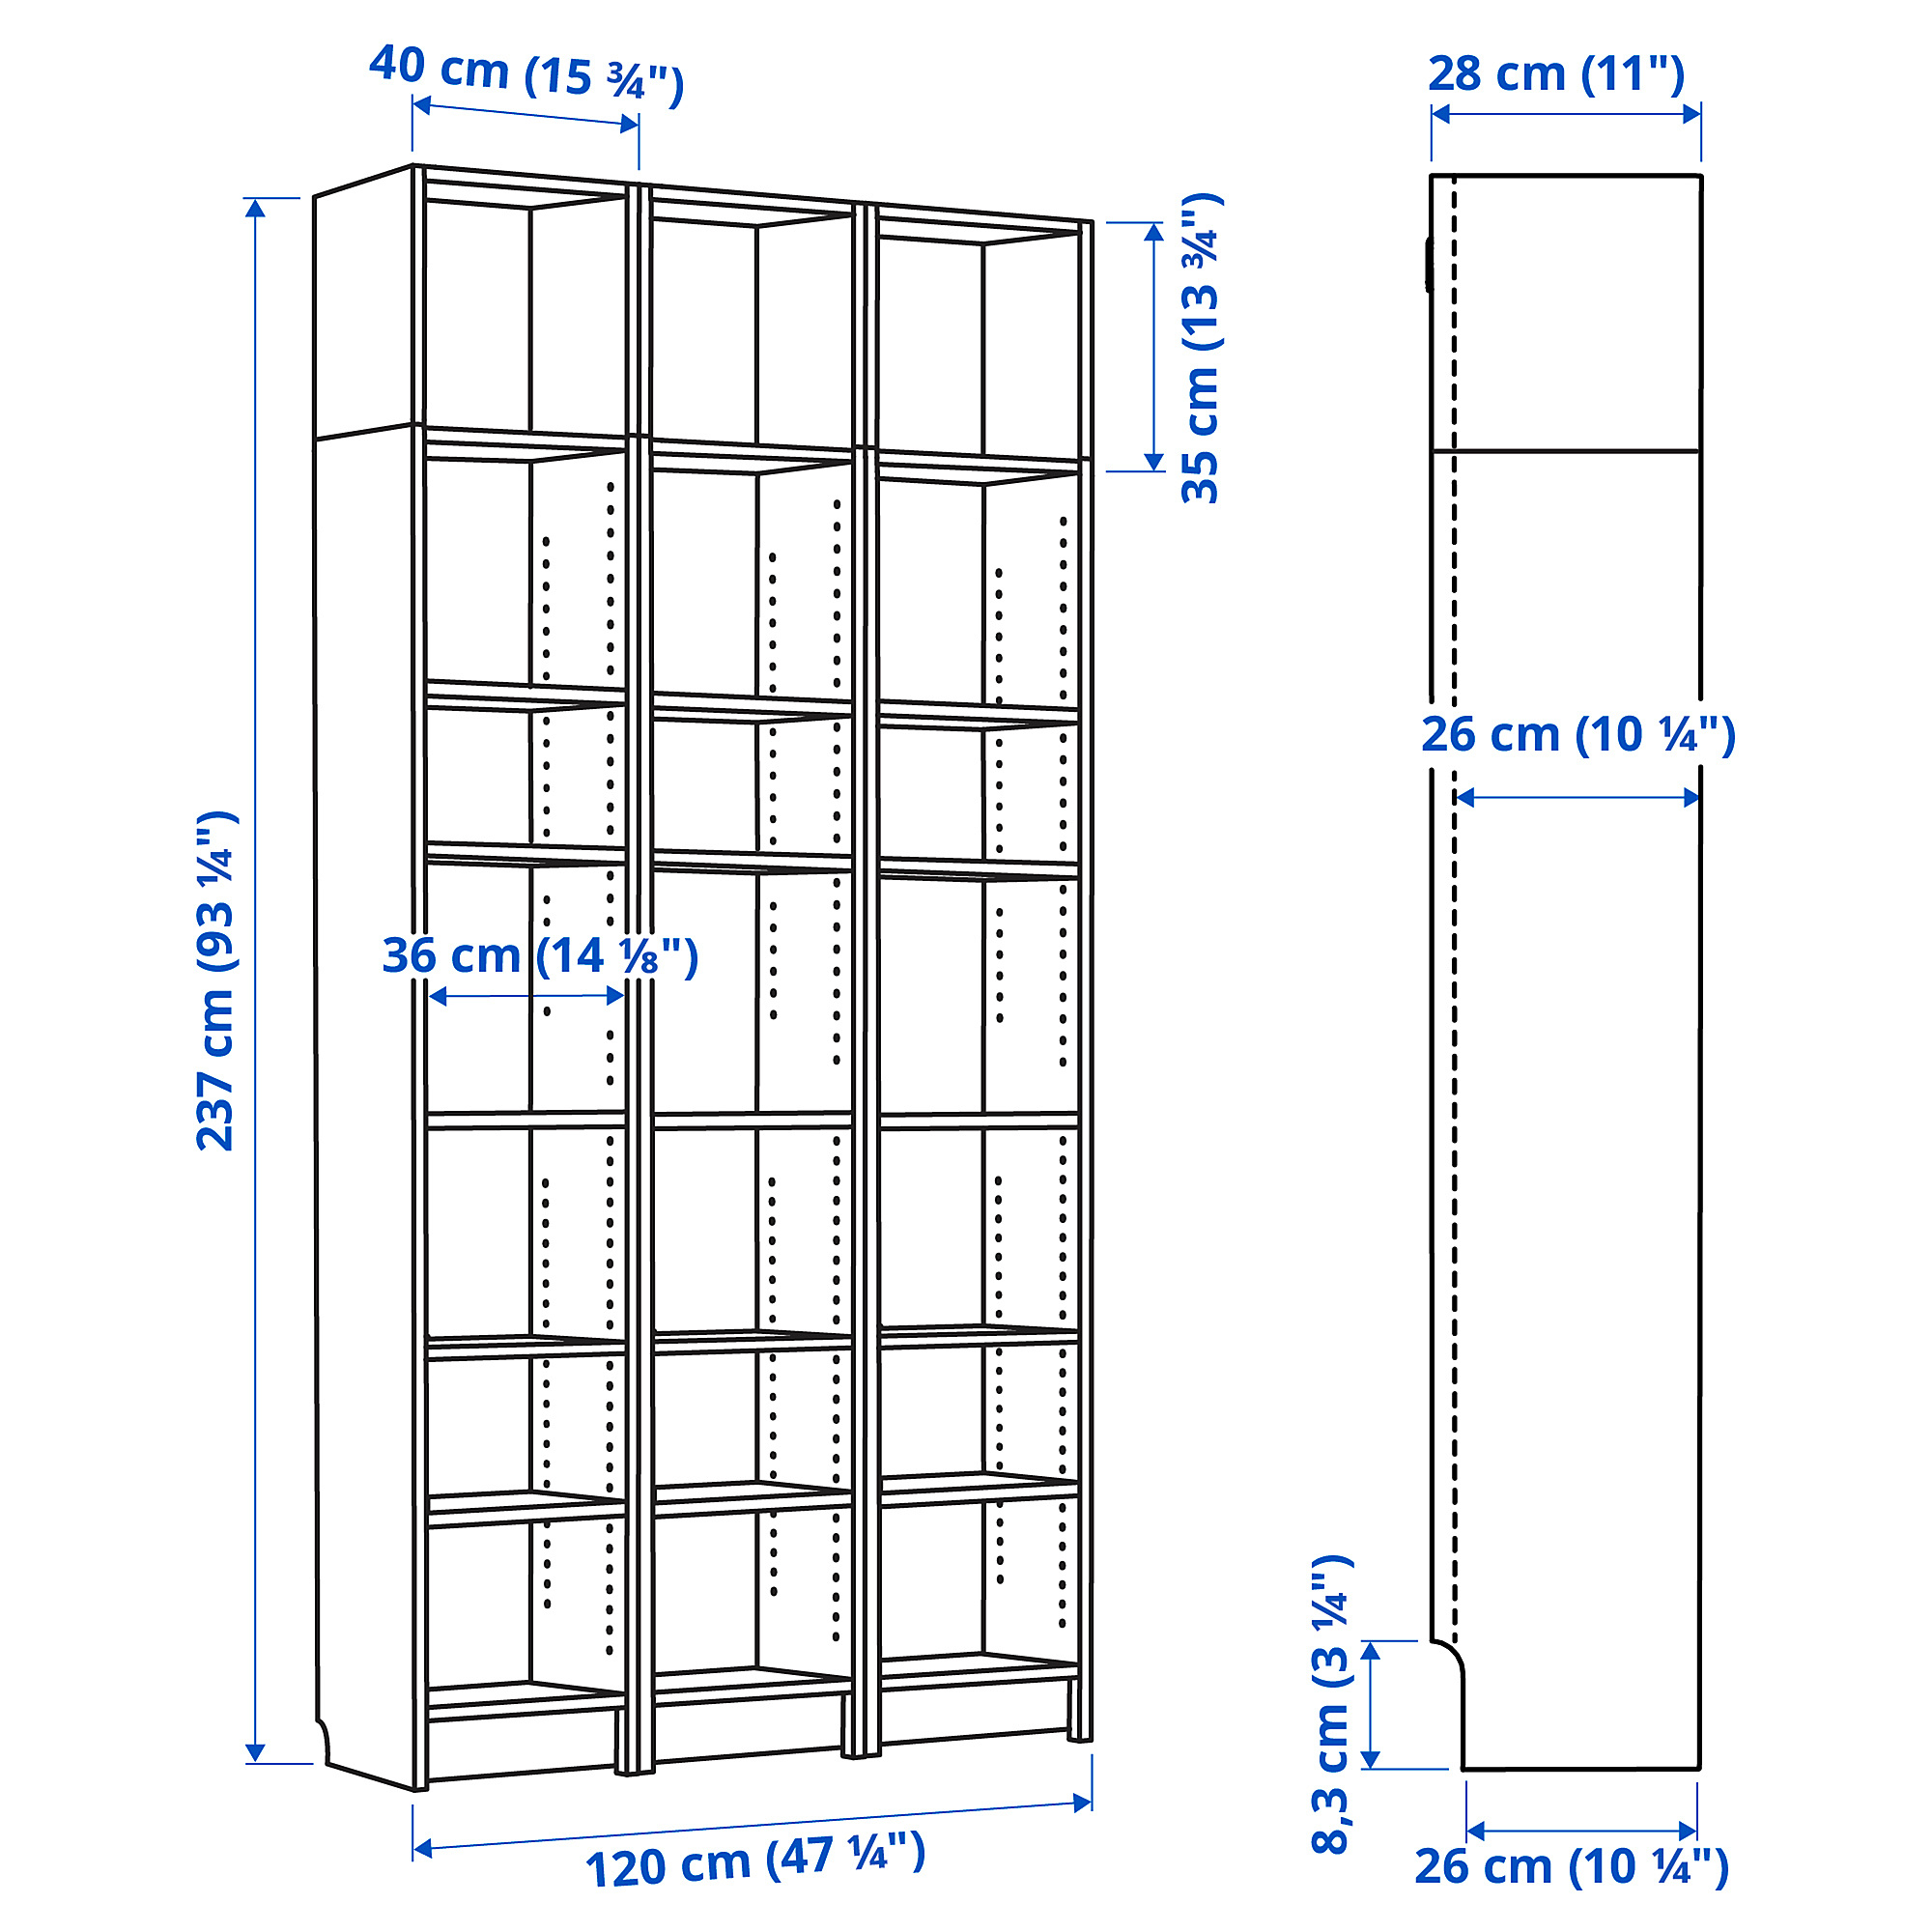 BILLY bookcase comb with extension units